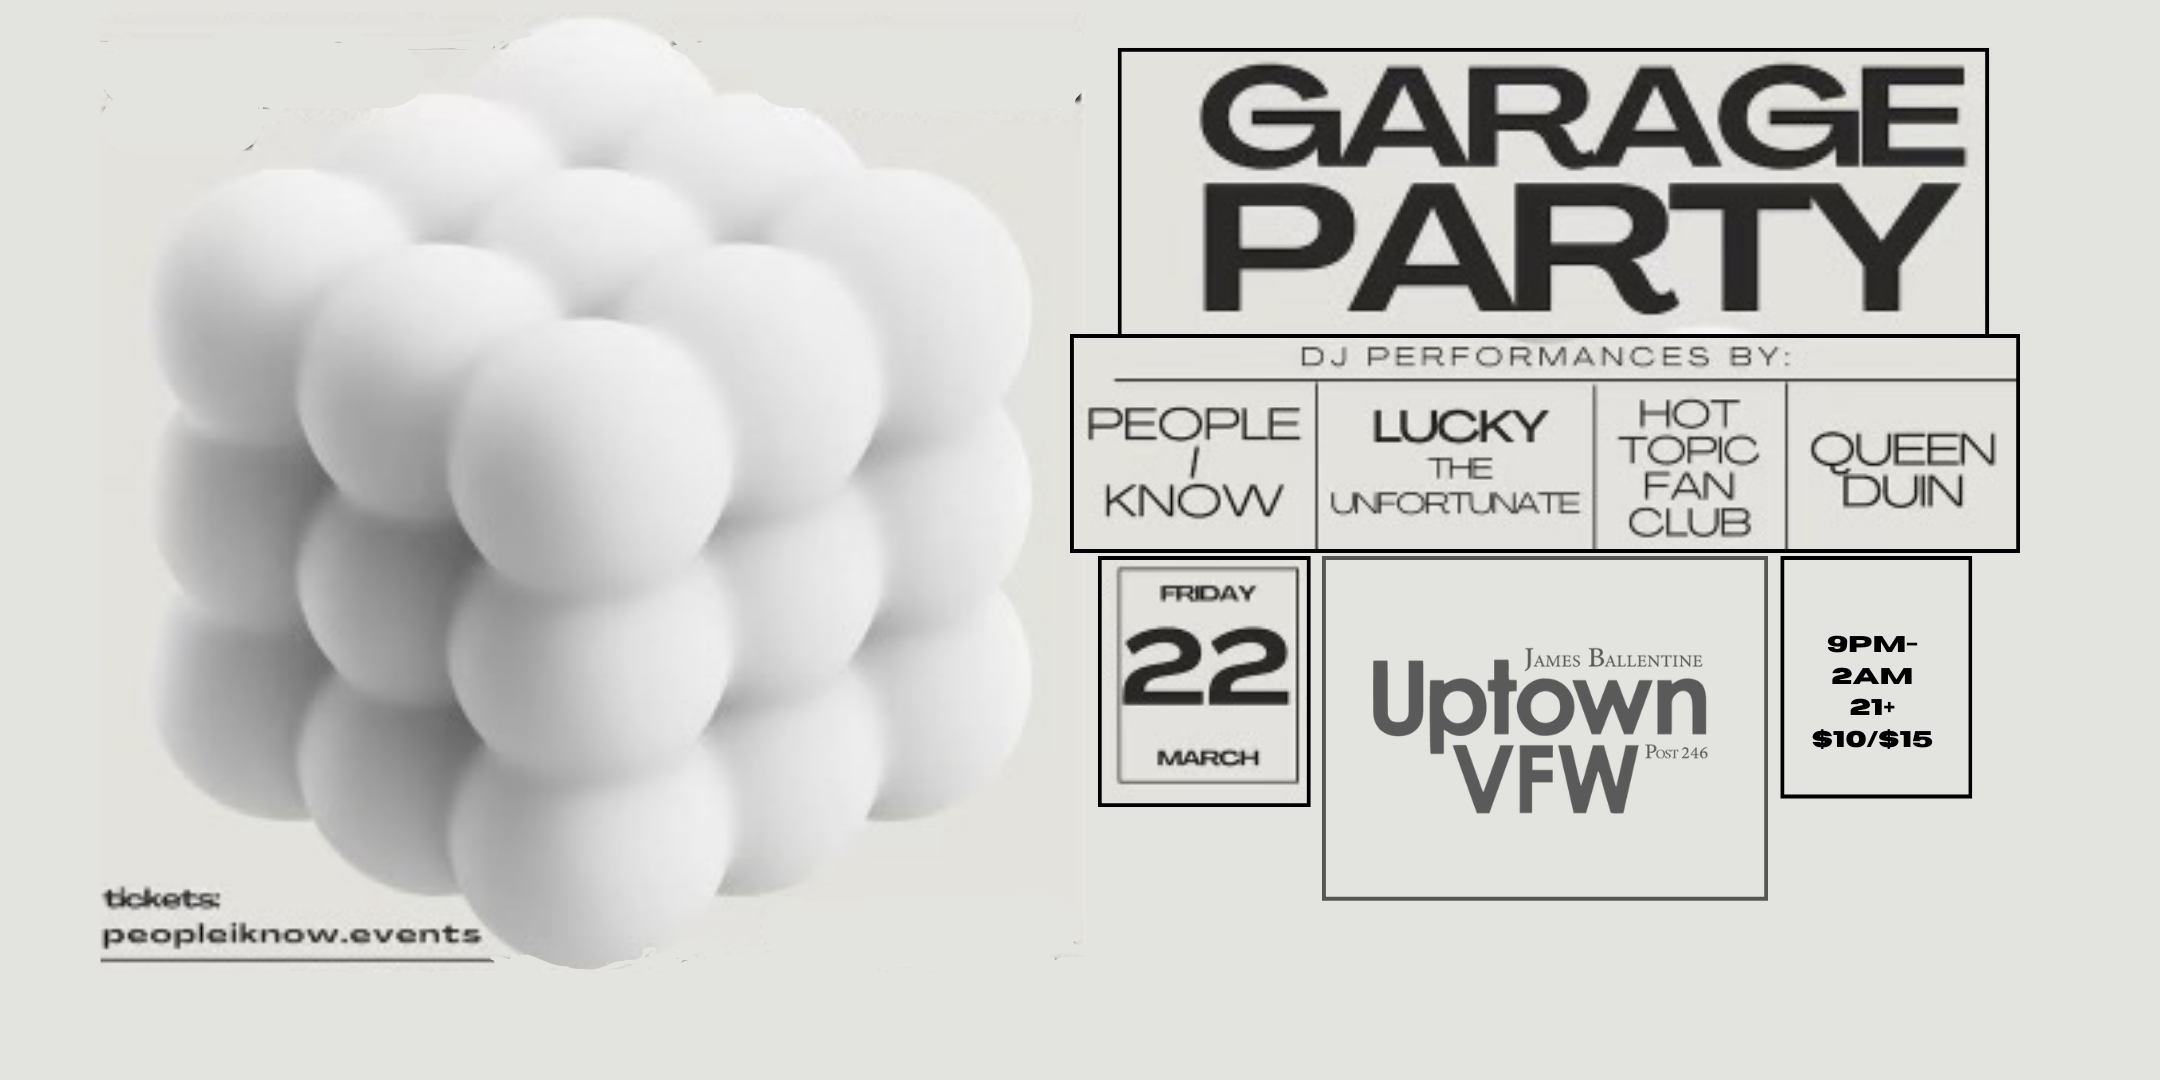 Garage Party DJ Performances by People I Know | Lucky The Unfortunate | Hot Topic Fan Club | Queen Duin A Night of UKGarage, Garage, SpeedHouse, House Friday March 22 James Ballentine "Uptown" VFW Post 246 2916 Lyndale Ave S Mpls Doors 9:00pm :: Music 9:00pm :: 21+ GA: $10 ADV / $15 DOS